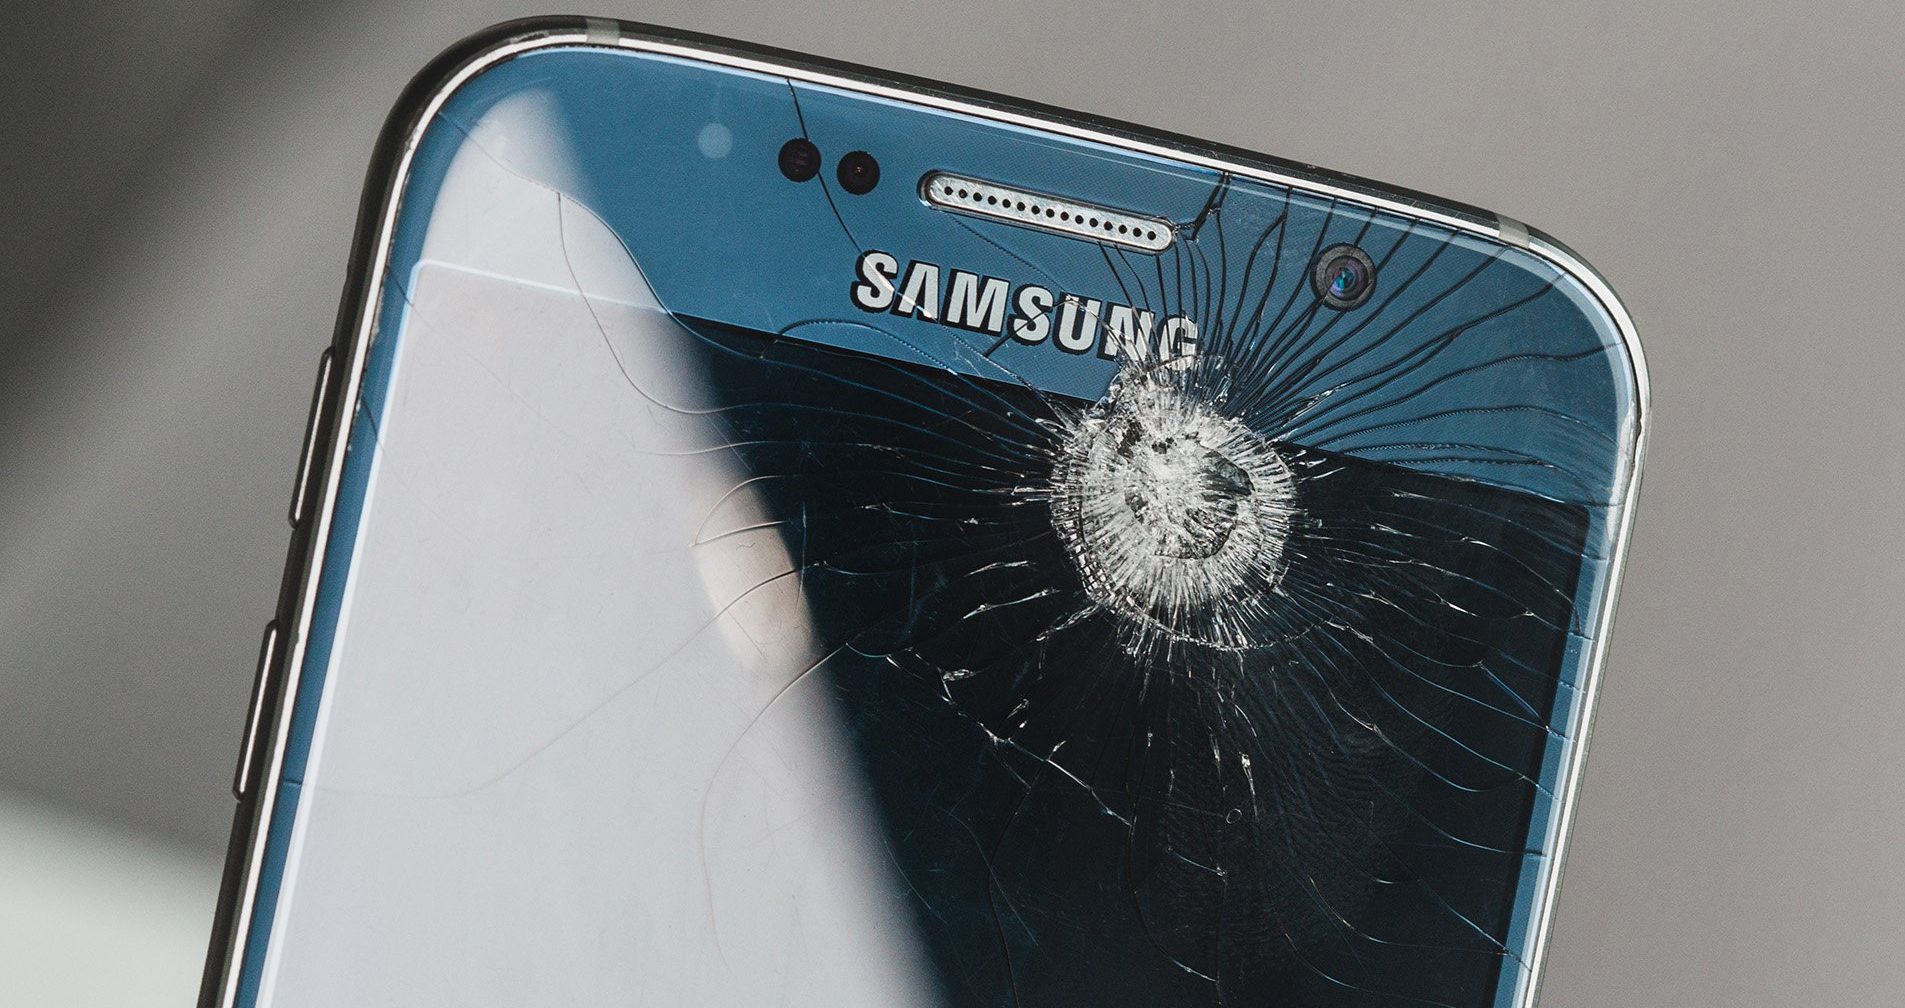 How To Unlock Android Device with Cracked or Broken Screen